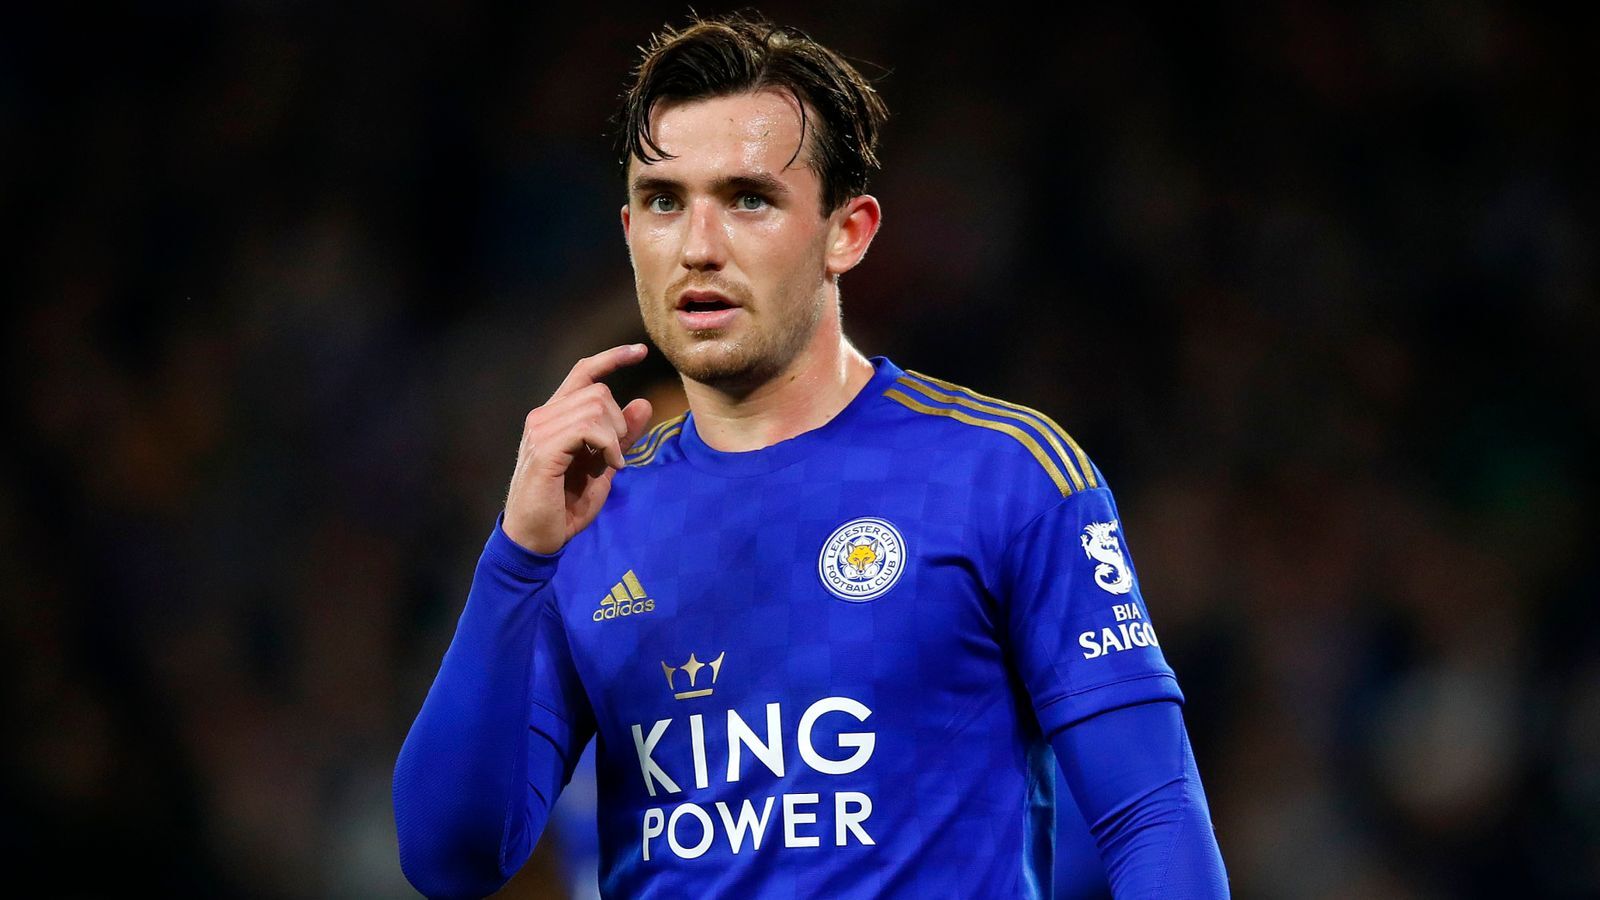 Chelsea intent to sign Chilwell